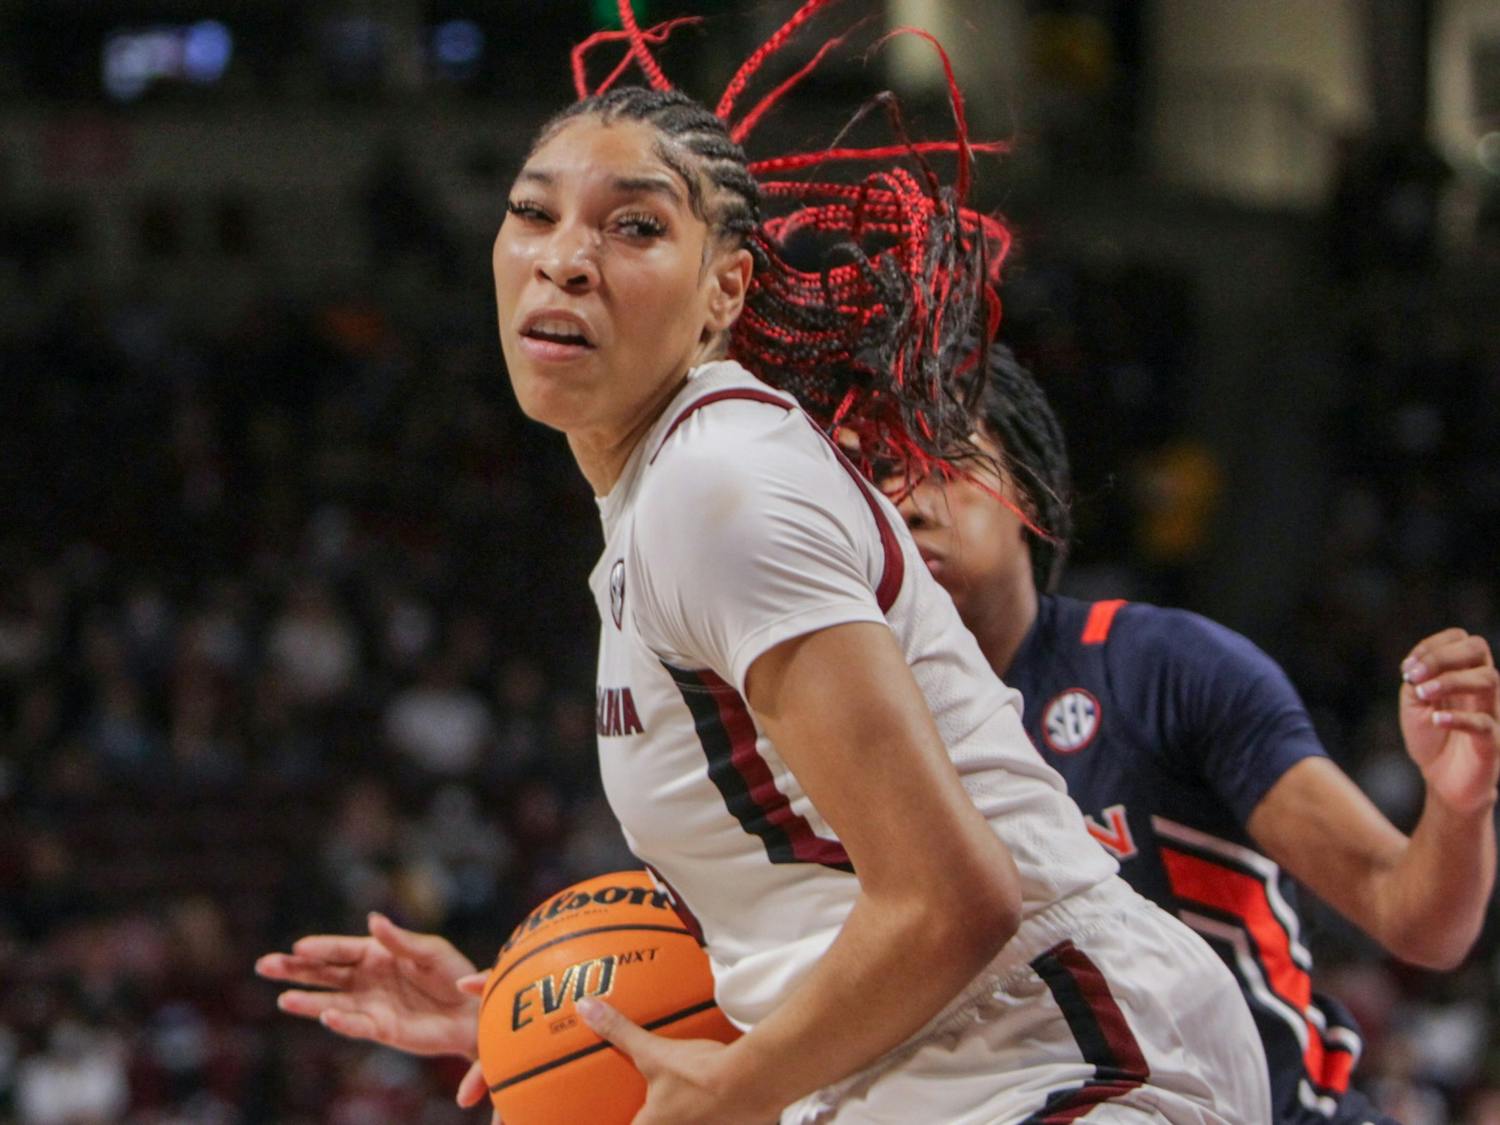 Senior forward Victaria Saxton moves toward the basket during a game on Feb. 17, 2022 at Colonial Life Arena in Columbia, SC. The Gamecocks beat Auburn 75-38.